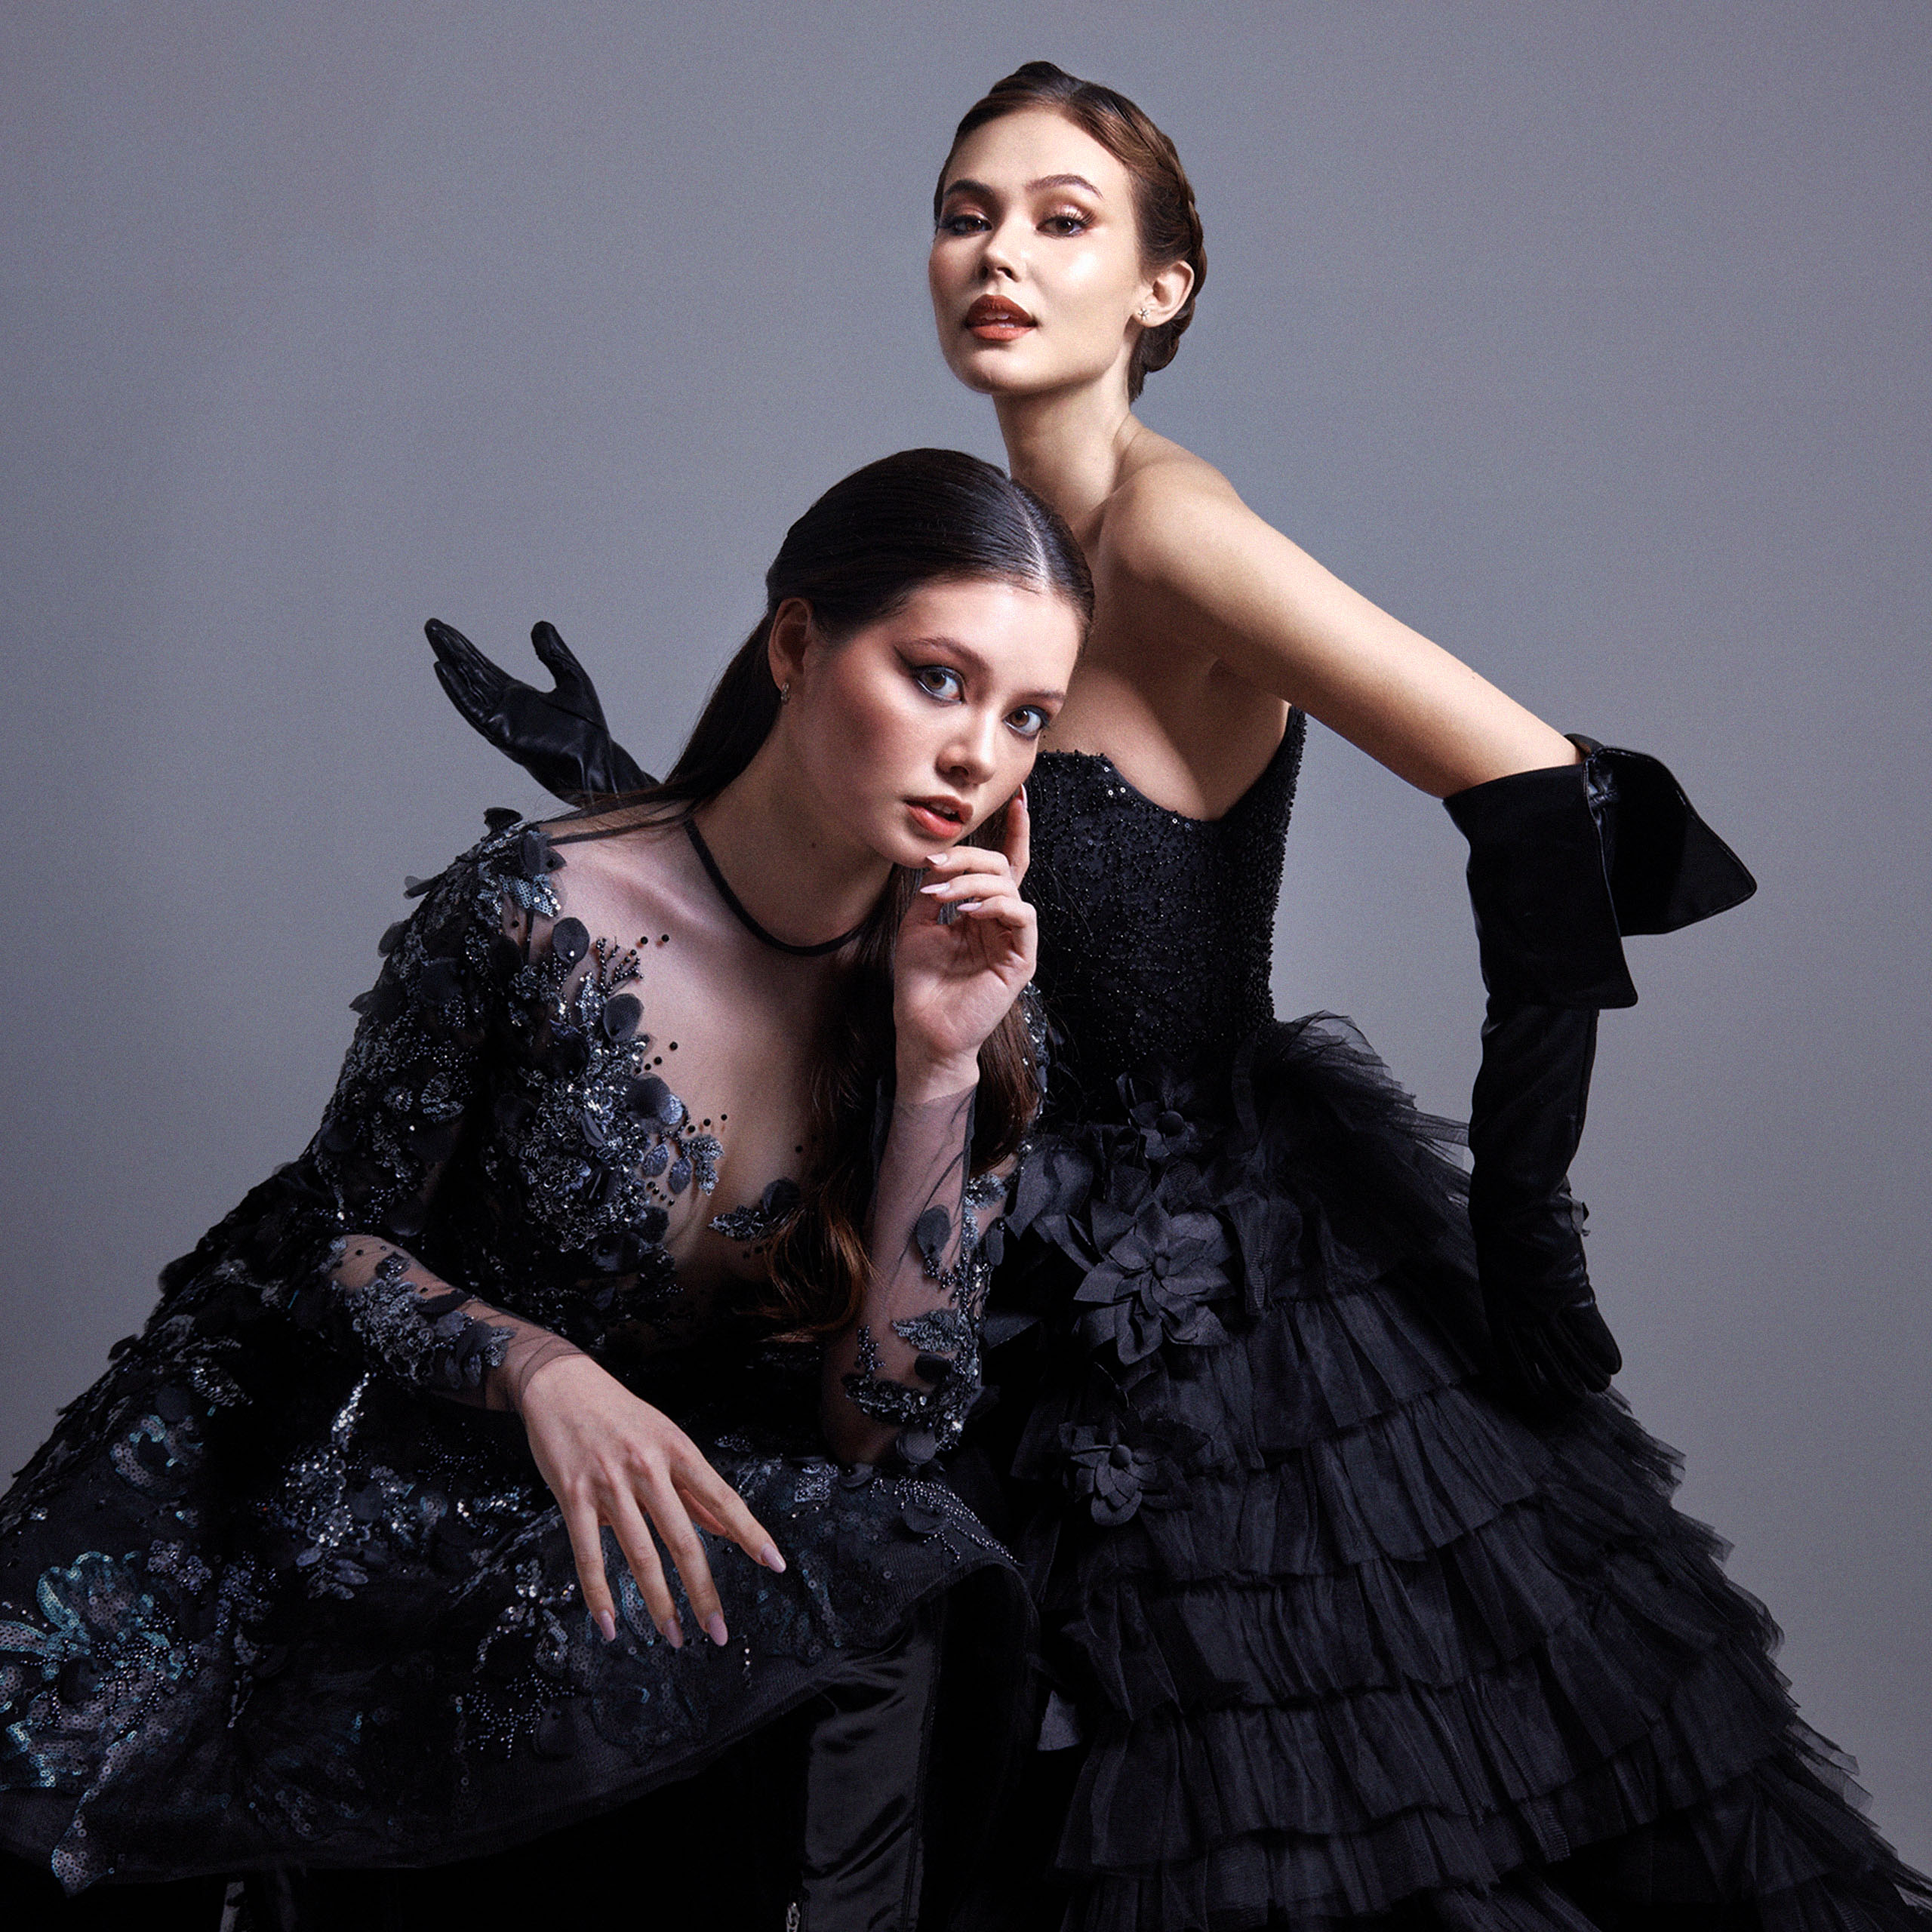 What to Expect at the City of Manila’s First Fashion Show